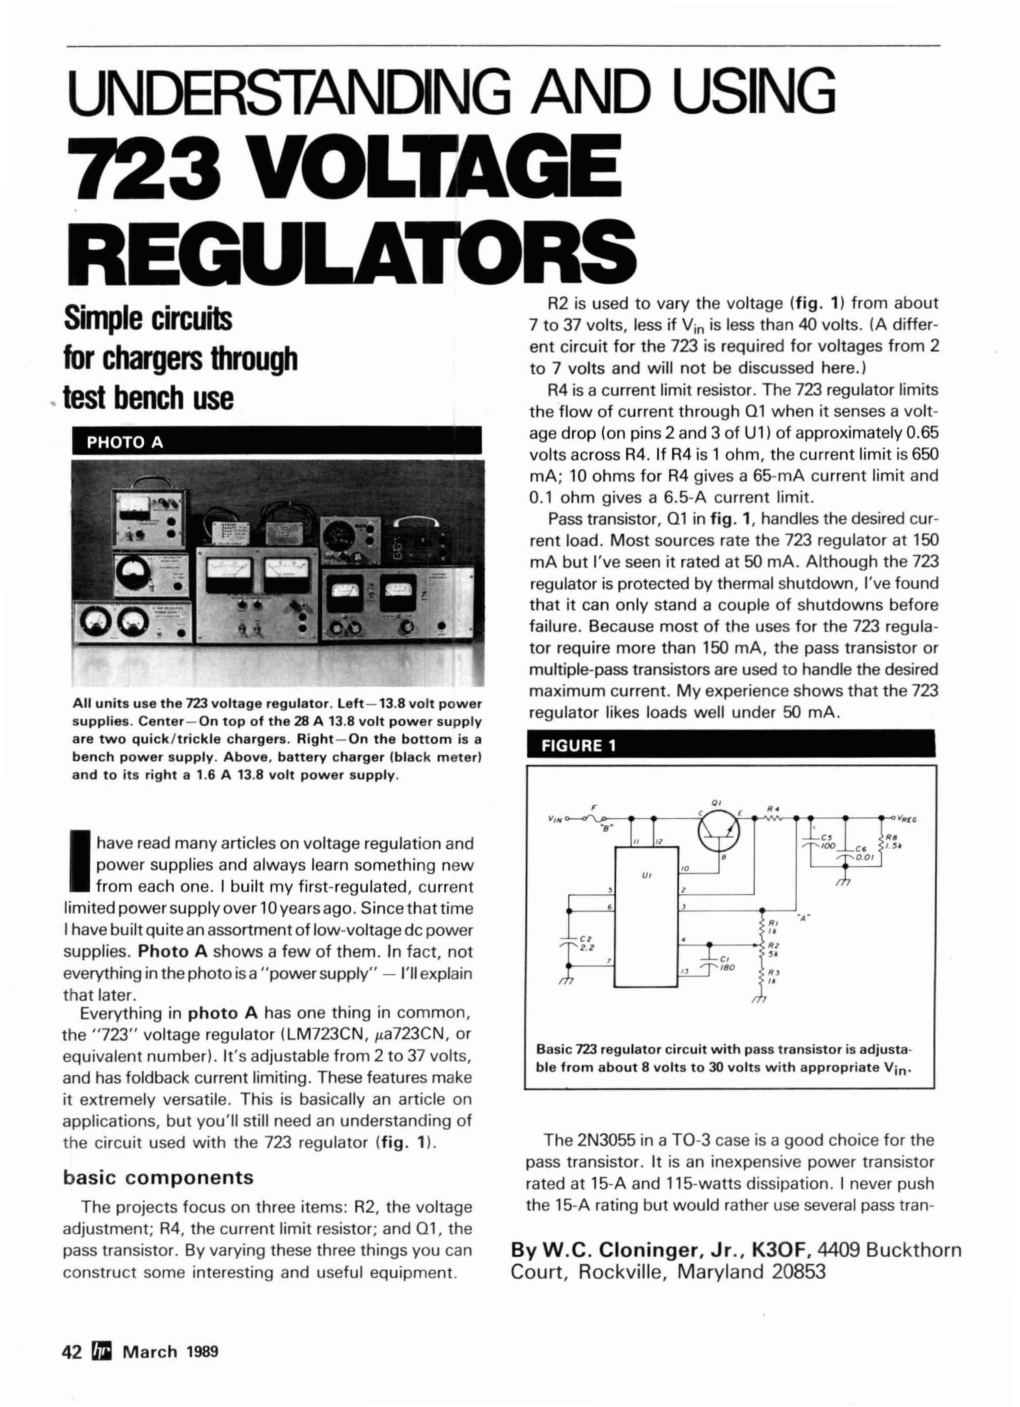 UNDERSTANDING and USING 723VOLTAGE REGULATORS R2 Is Used to Vary the Voltage (F Ig